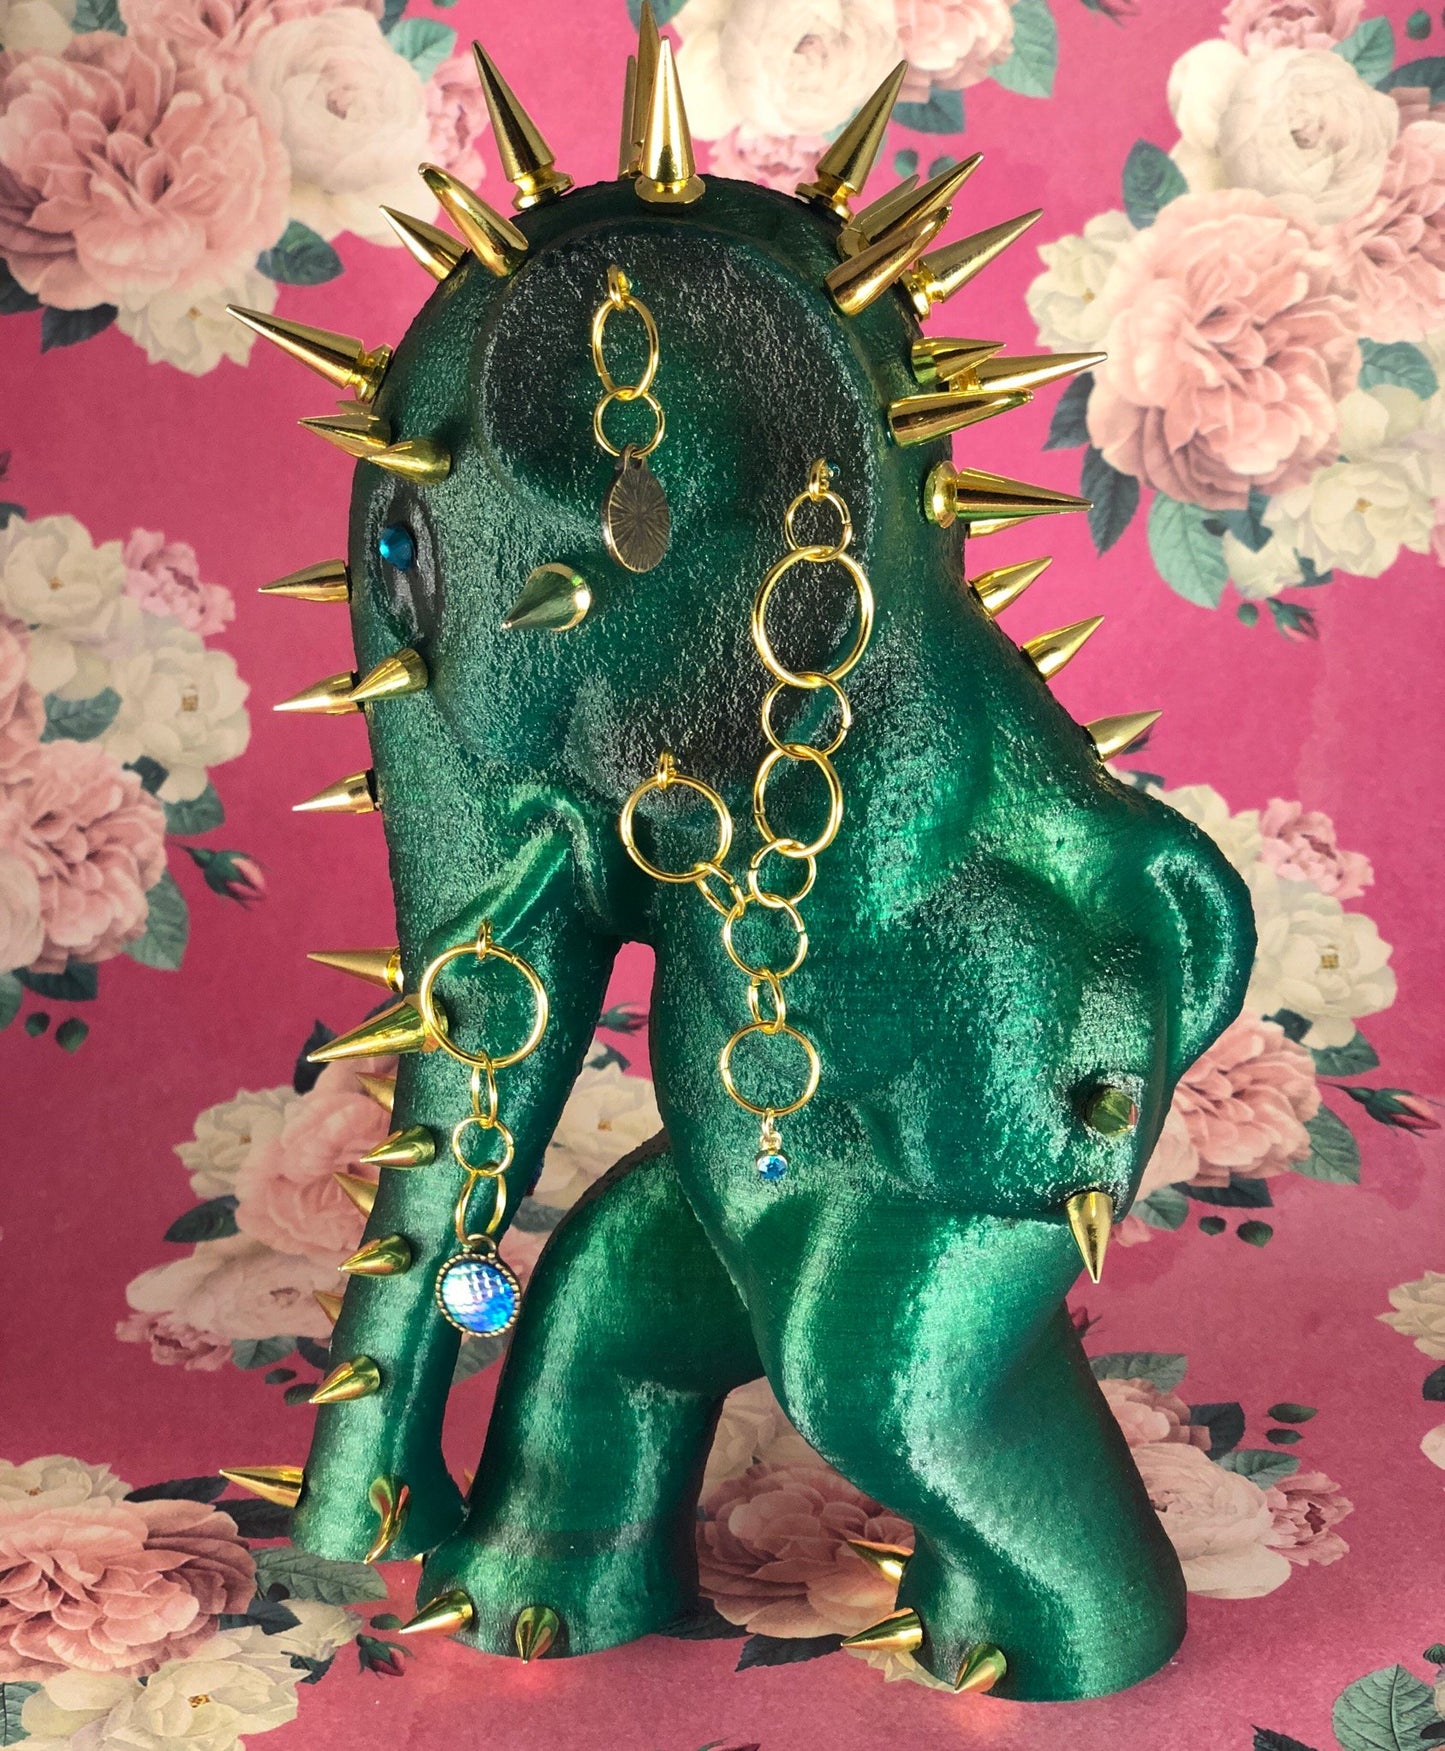 Waking Elephant: Translucent Green with Black. Gold Spikes and Such